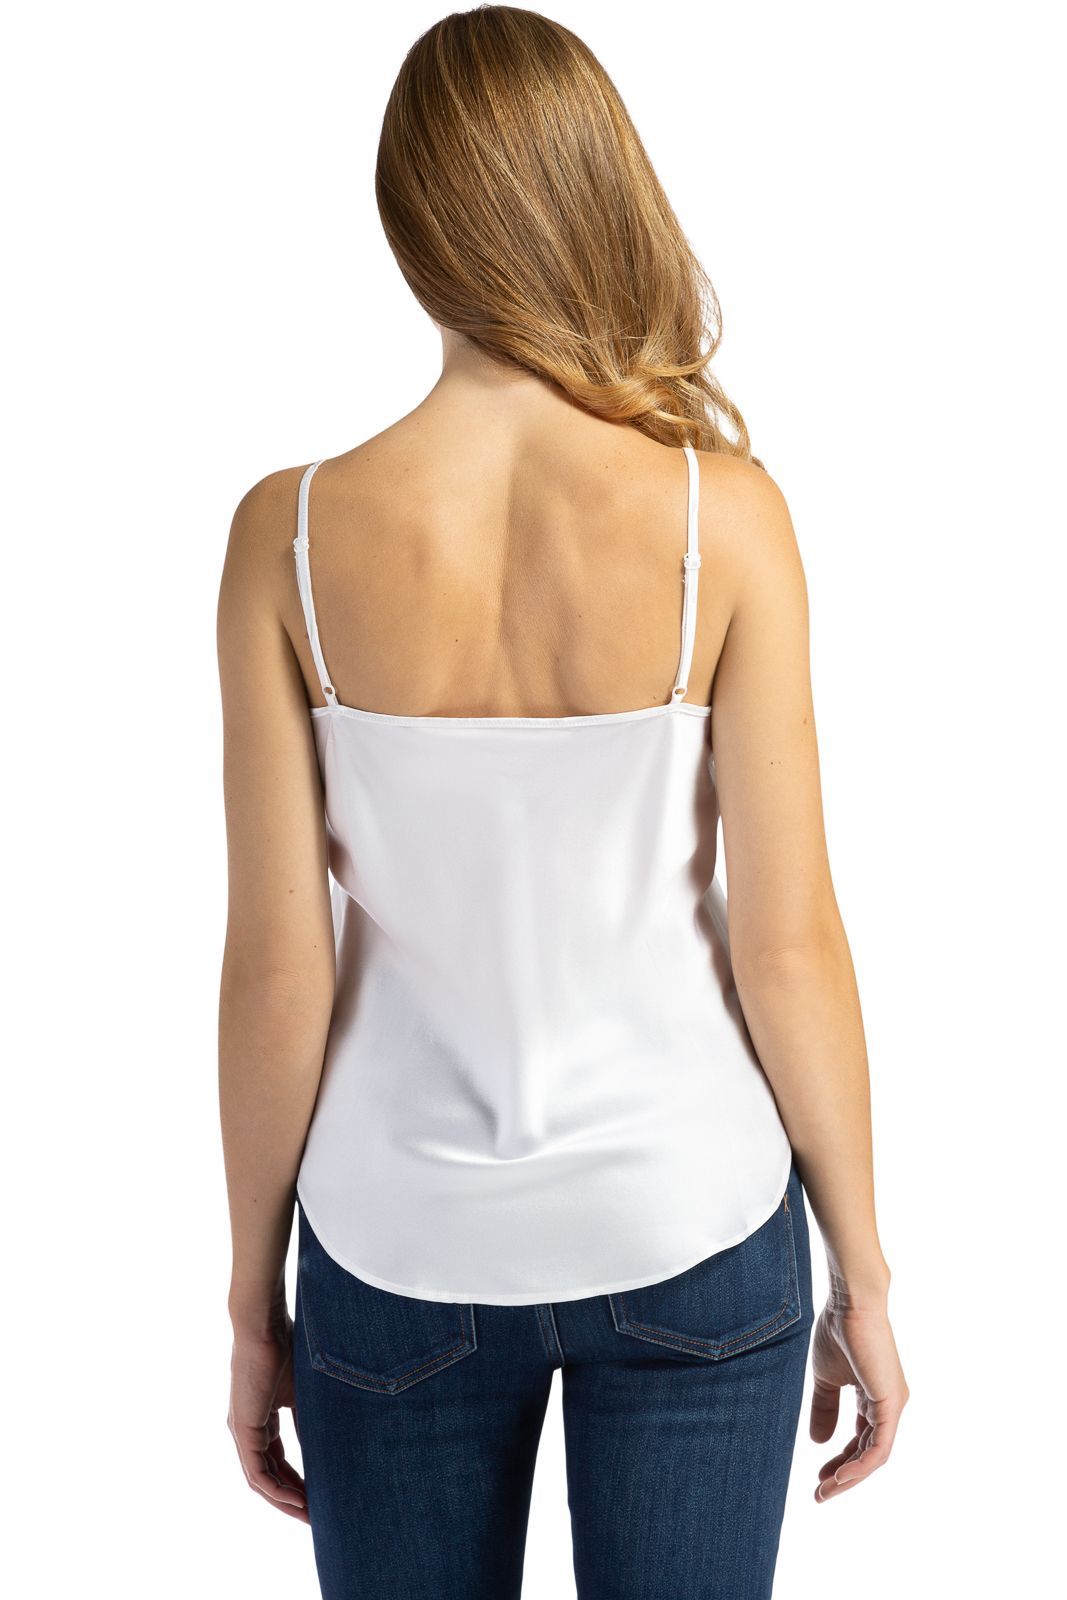 BUILT-IN BRA WOMEN Mulberry Camisole Top Breathable Pure Silk Cami Tank T  Shirts £14.15 - PicClick UK